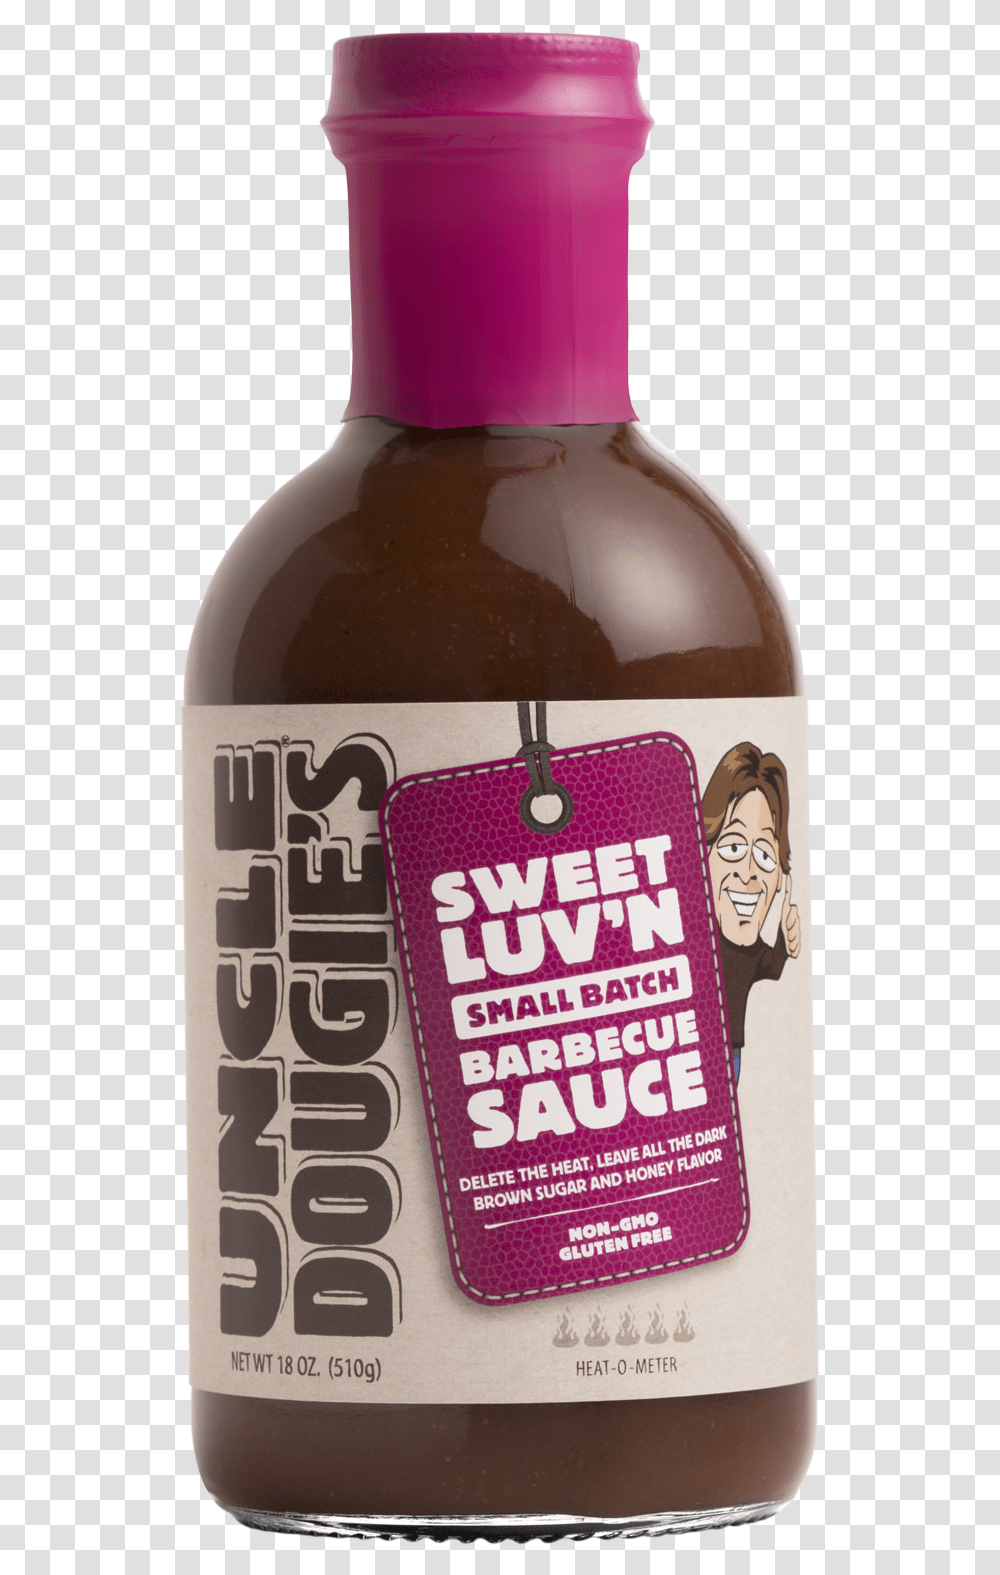 Sweet Luv N Small Batch Barbecue Sauce Glass Bottle, Beer, Alcohol, Beverage, Drink Transparent Png